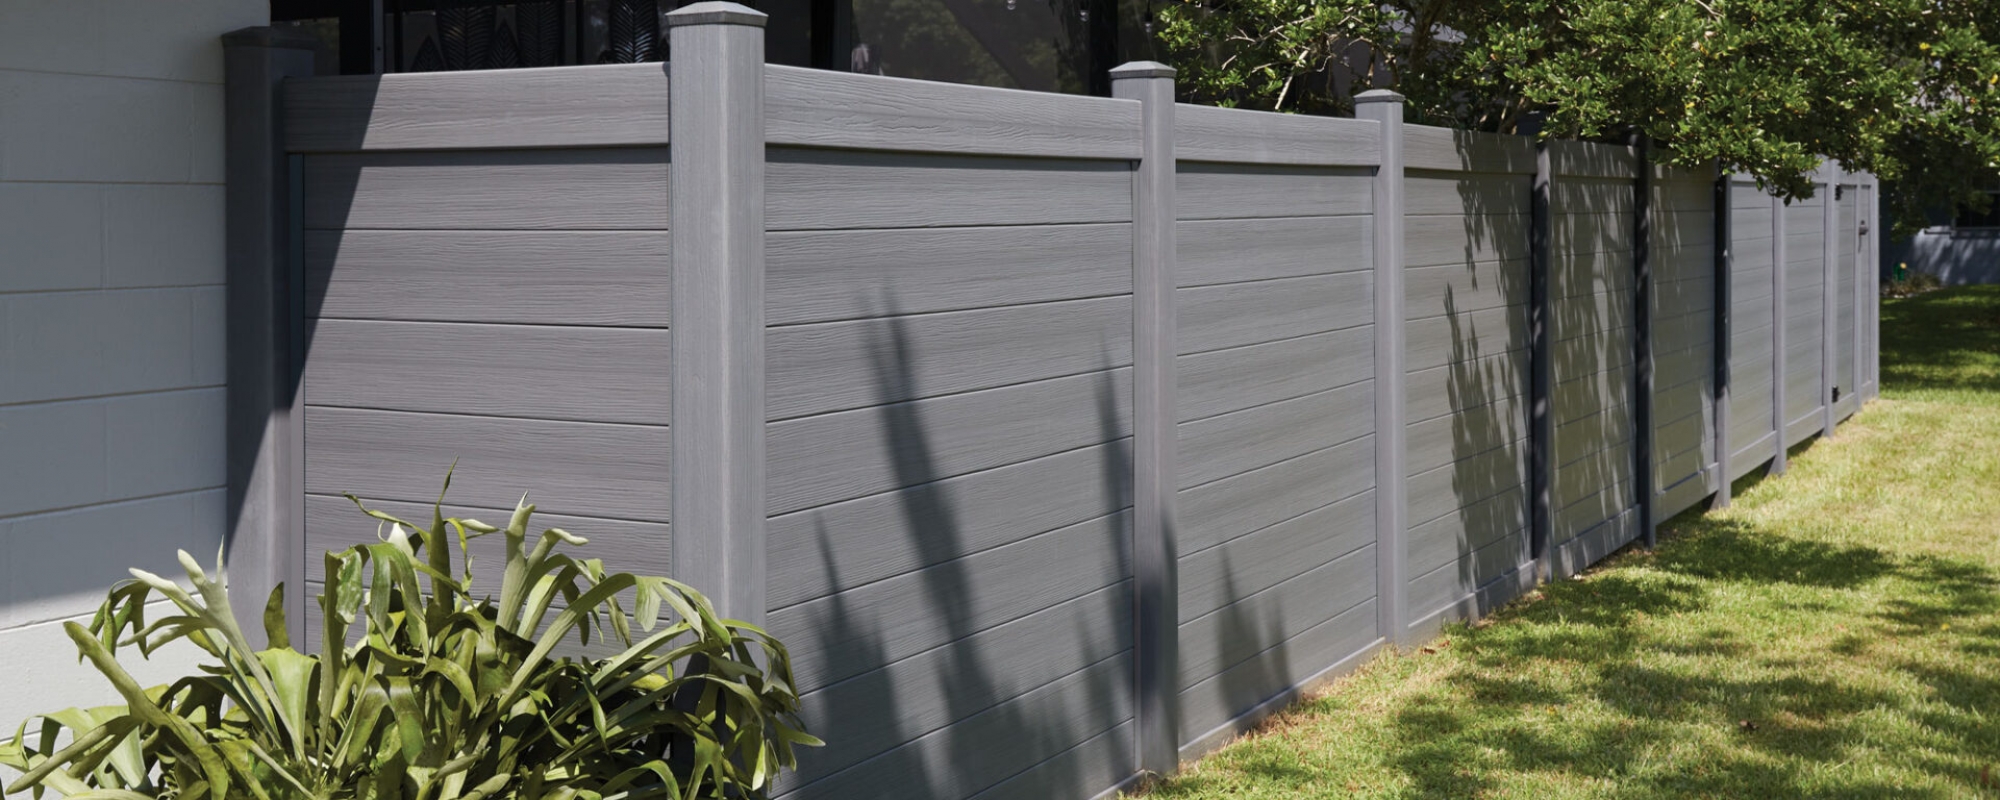 Brookline Horizontal Privacy Fence Simply Stunning 